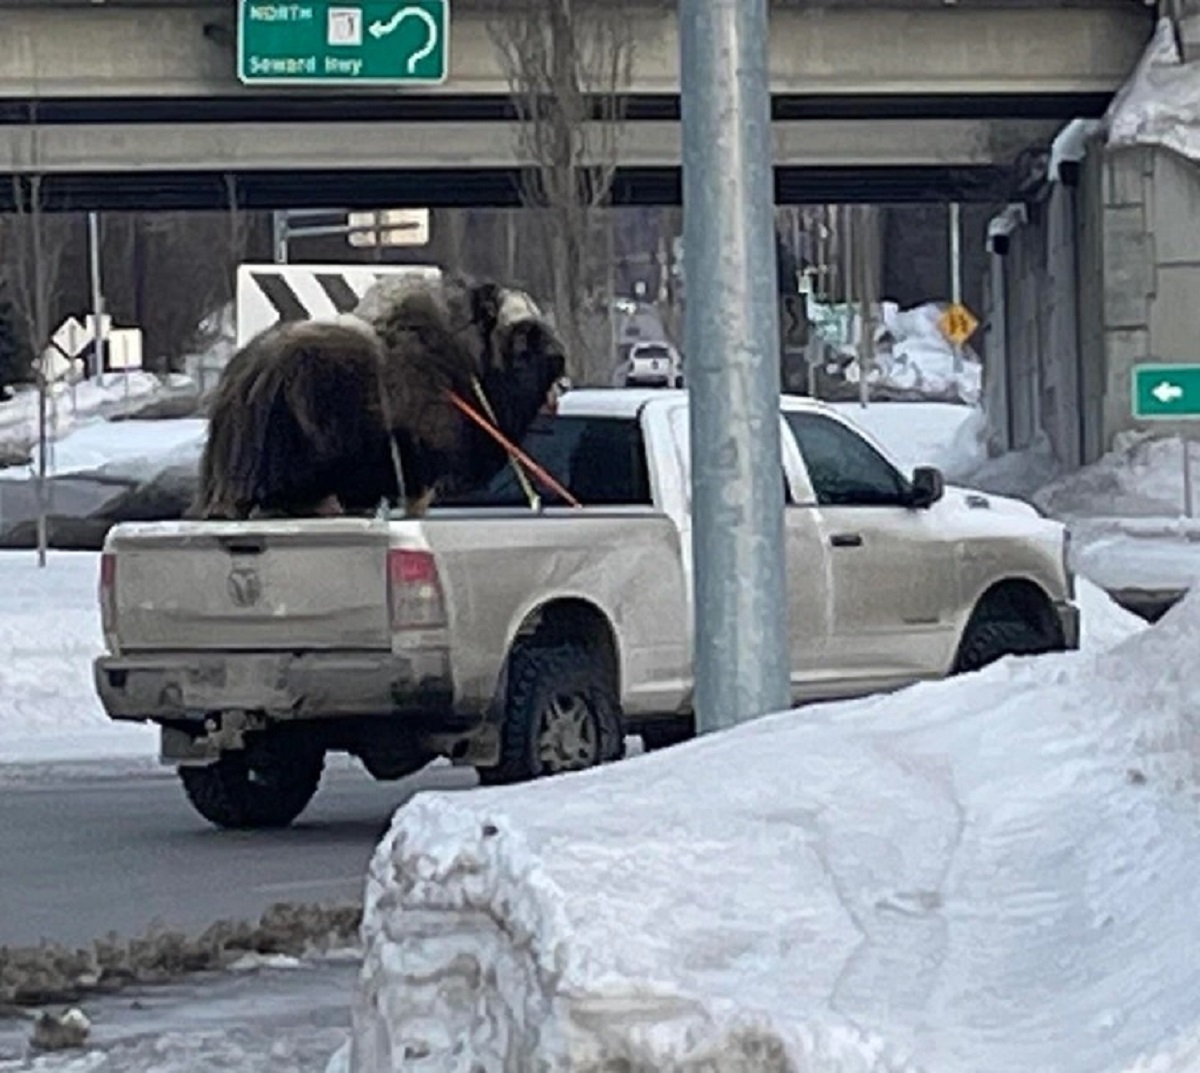 A bison in the back of a pickup truck is a development no one could’ve expect.